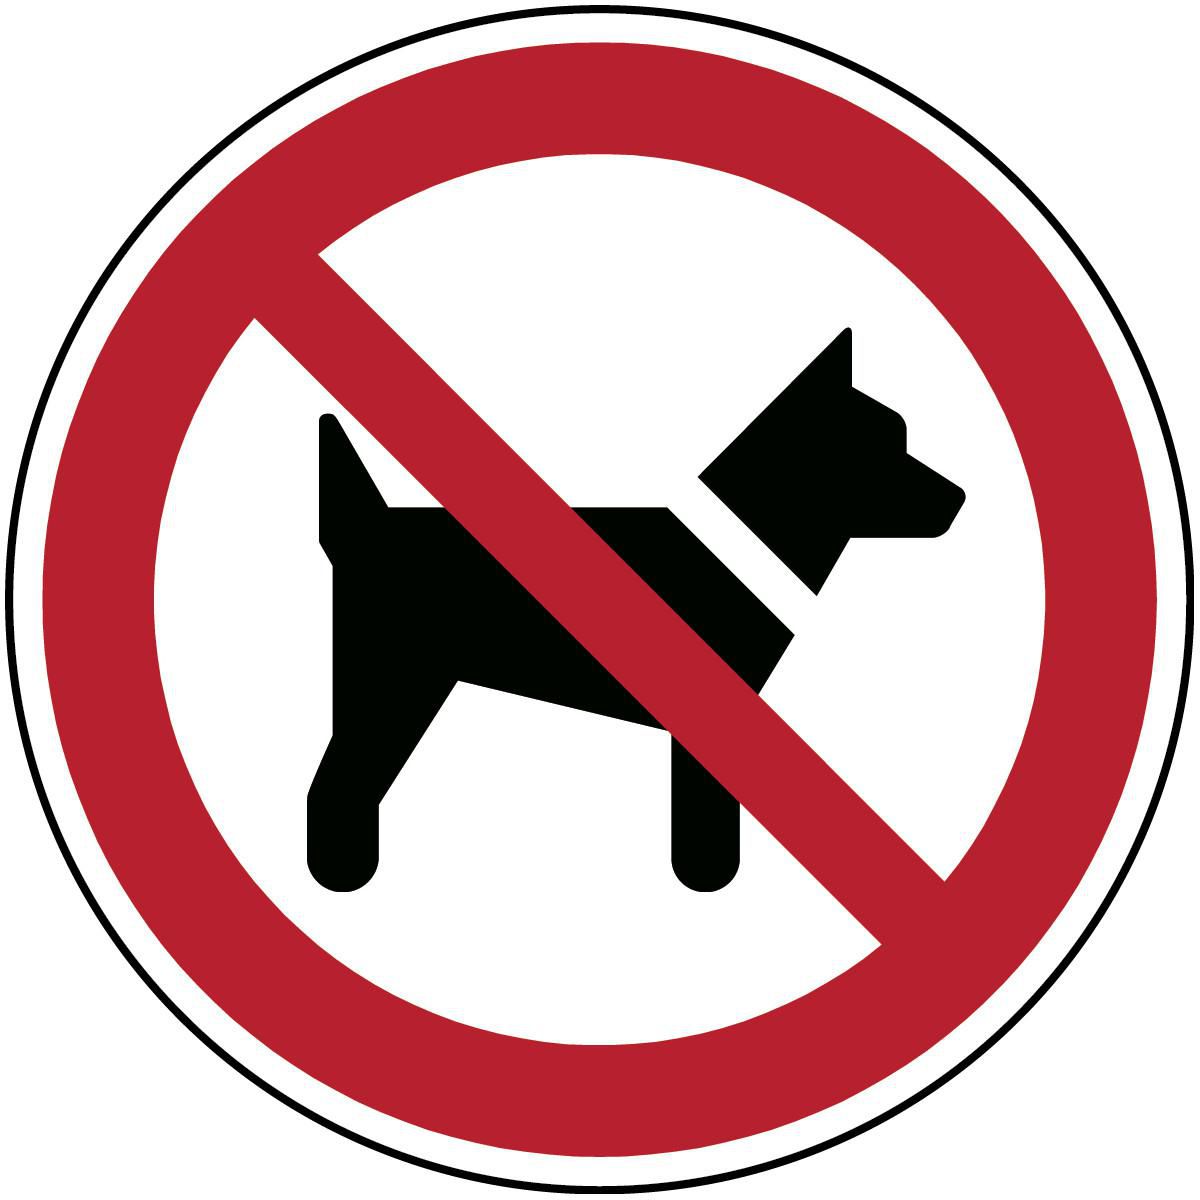 Brady PIC P021-DIA 200-PP-CRD1 W128413201 ISO Safety Sign - No dogs 